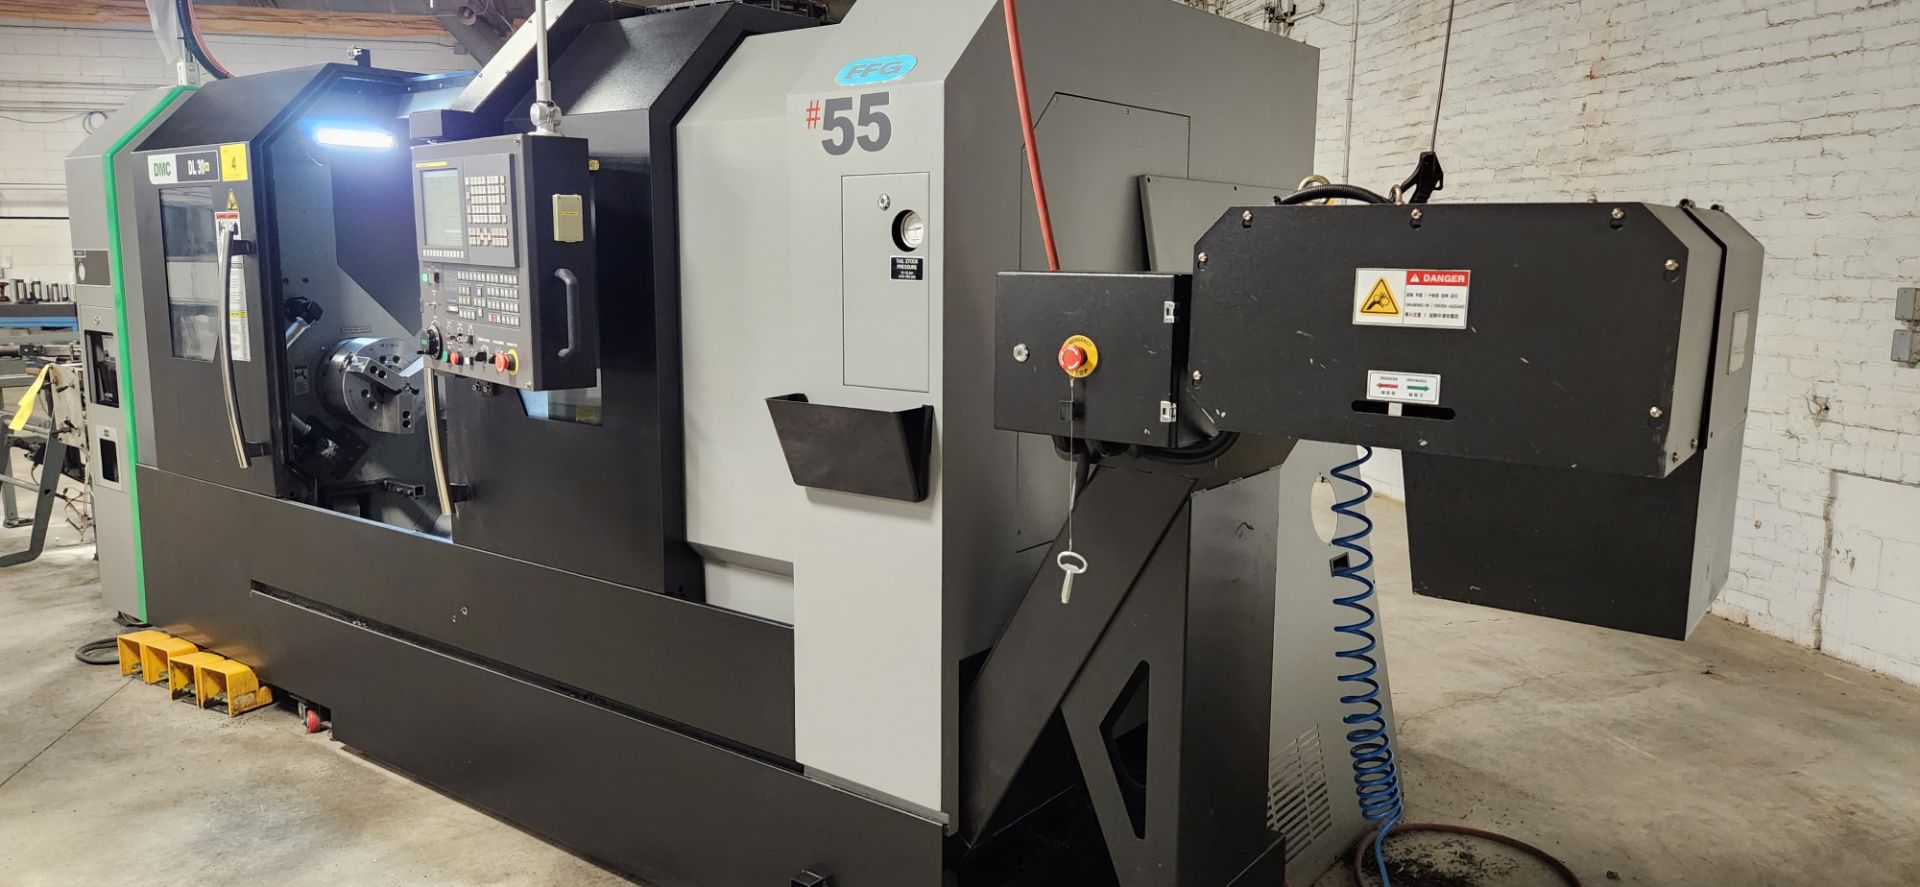 2018 DMC DL30 CNC TURNING CENTER WITH FANUC OI-TF CNC CONTROL, 24.02” SWING, 15.75” MAX. CUTTING - Image 2 of 9